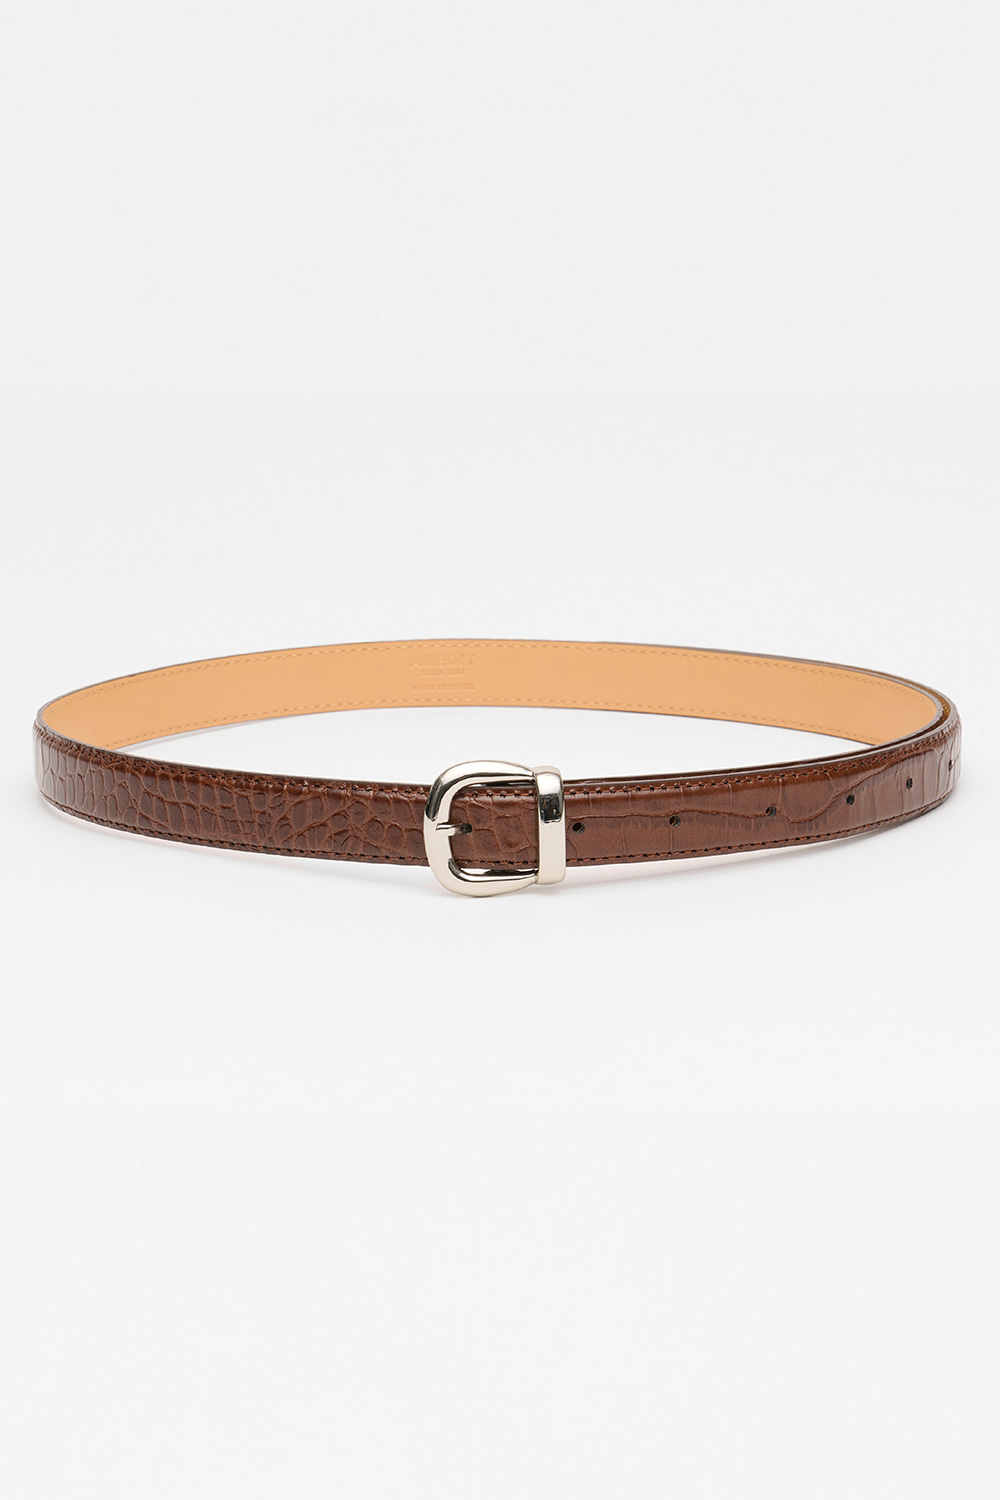 Croc Classic Leather Belt_Brown Silver